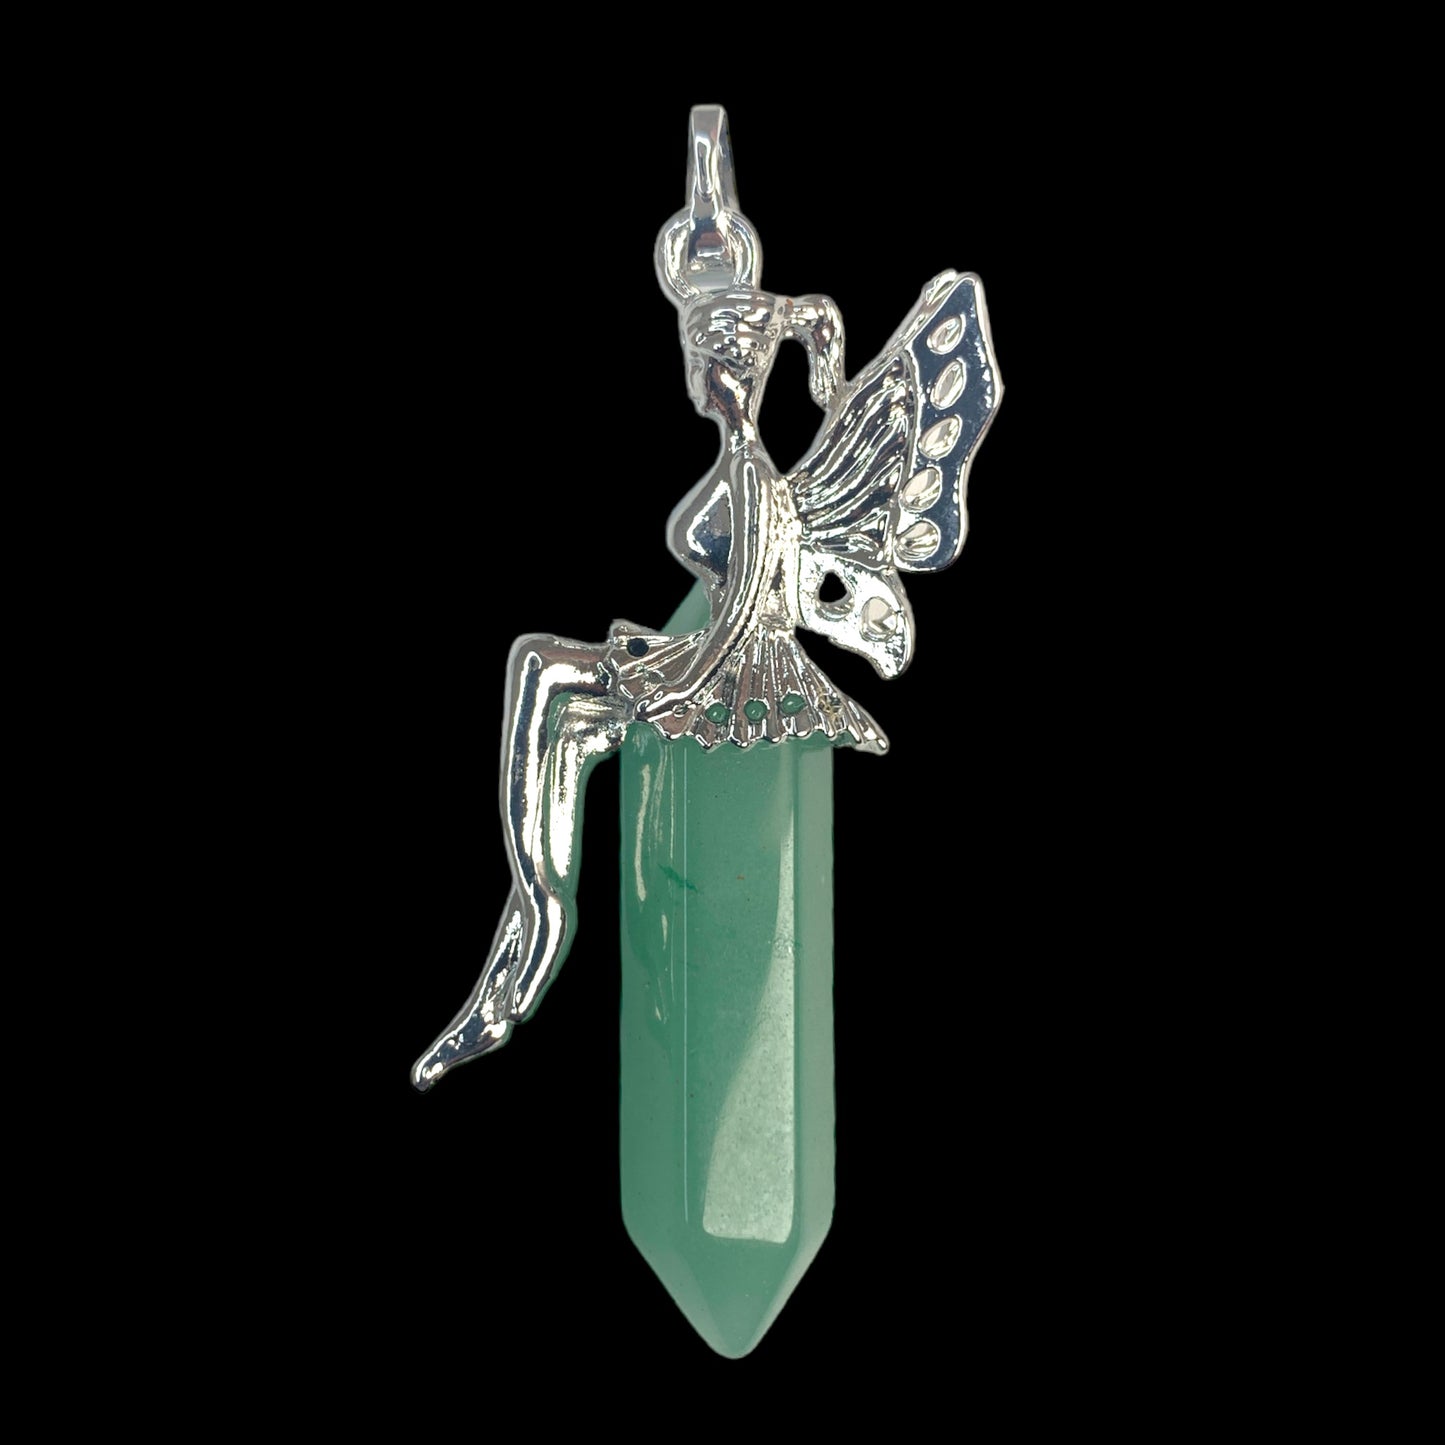 Fairy Design Terminated Pendant - Green Aventurine - Silver Color Plated Metal - 50mm - China - NEW1022